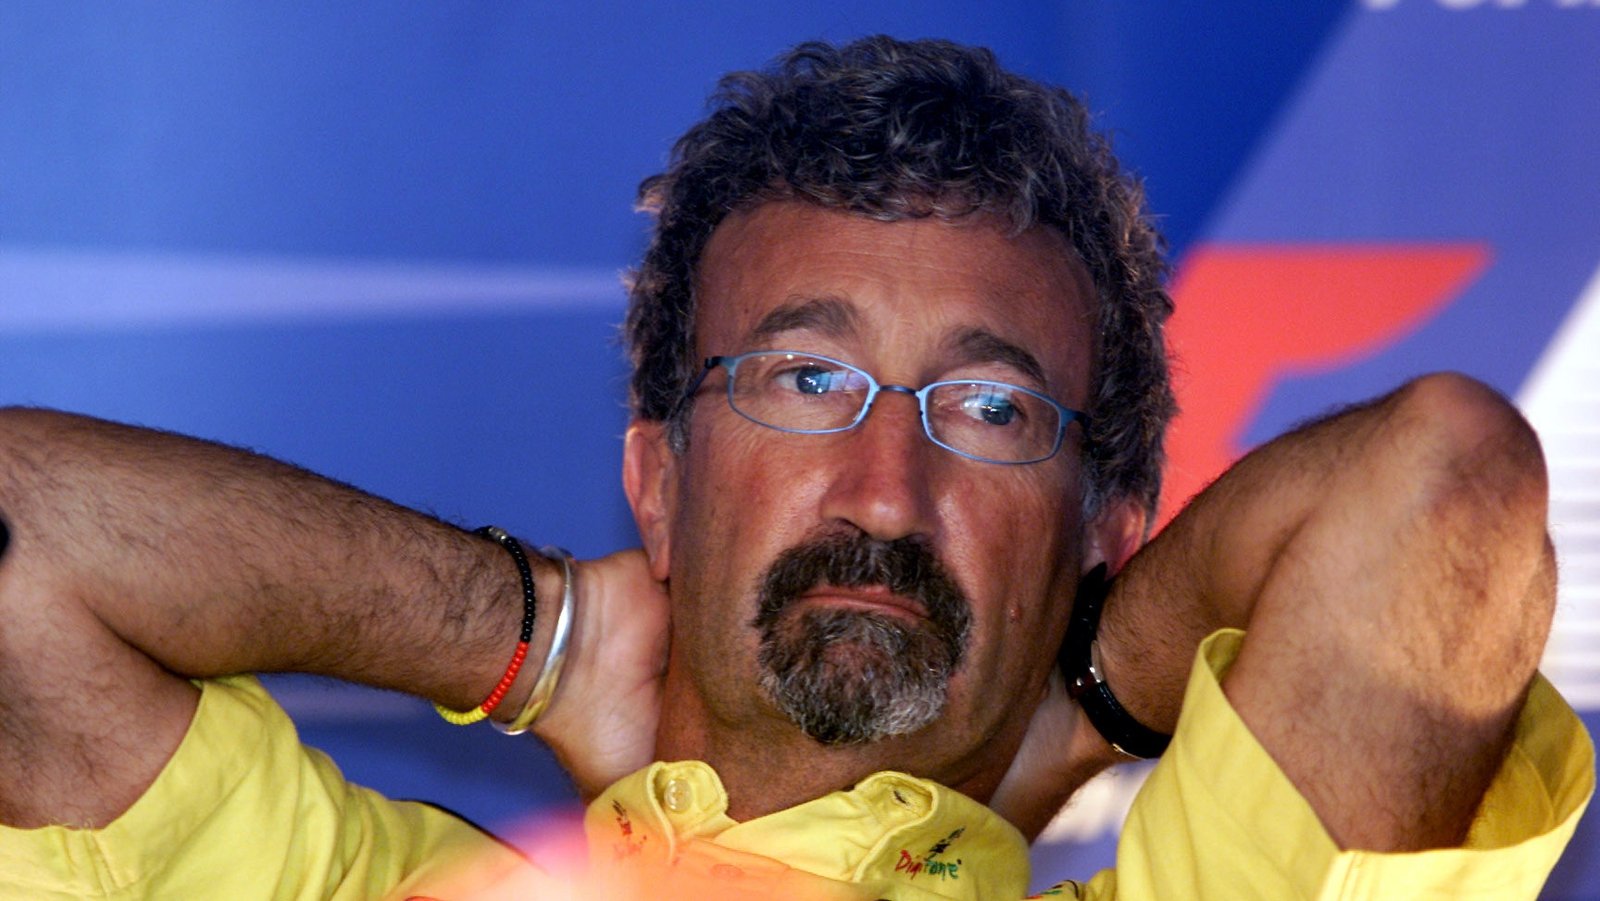 Image - Eddie Jordan maintained an independent F1 team for a decade